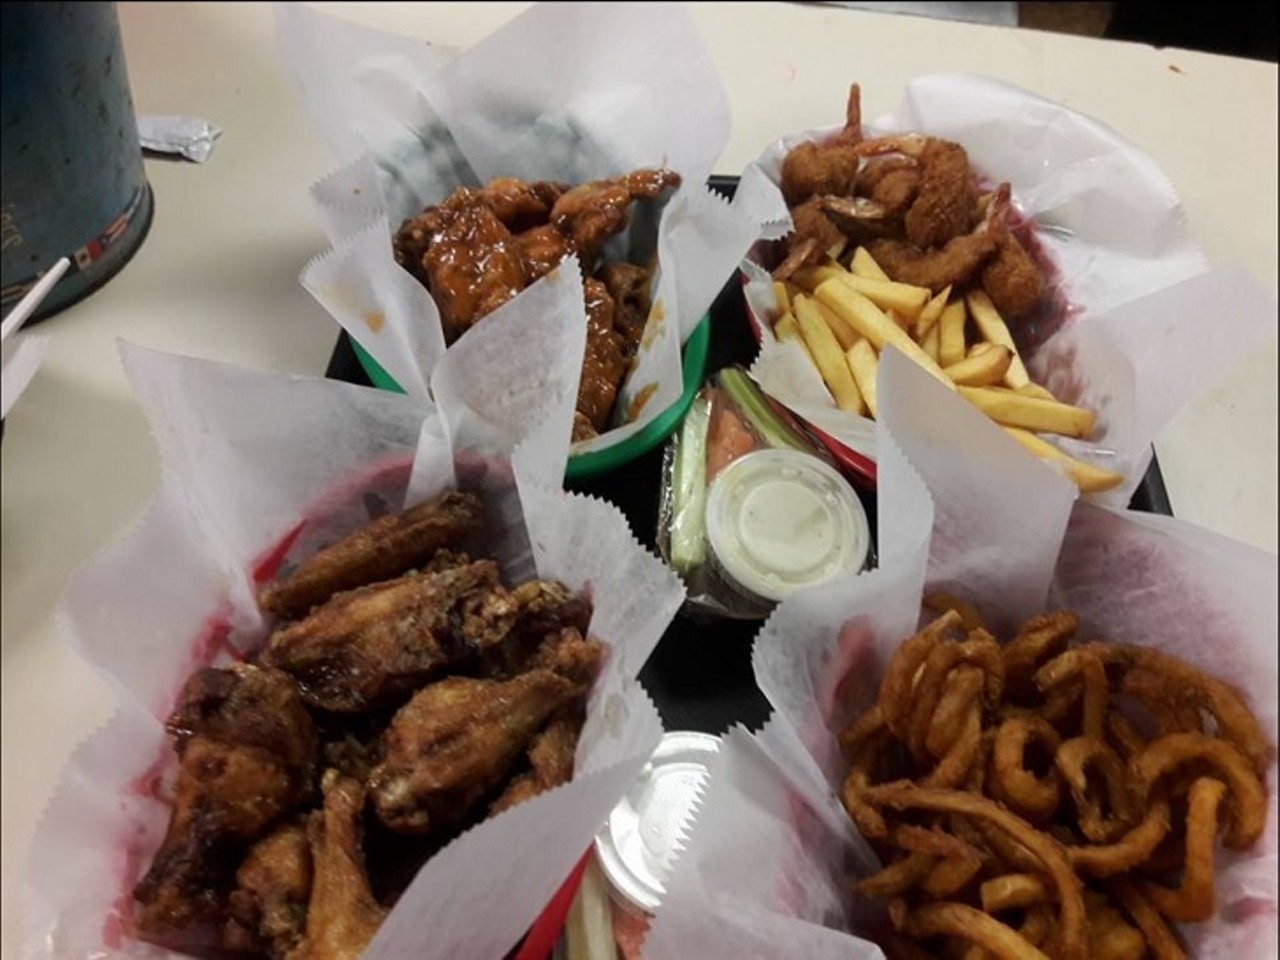 Wing Alley 
2215 E. Irlo Bronson Memorial Highway, Kissimmee, 407-348-9464
A small family-owned restaurant, Wing Alley is the kind of place you can bring your friends and family, or chow down on your own. 
Photo via Wing Alley on Facebook